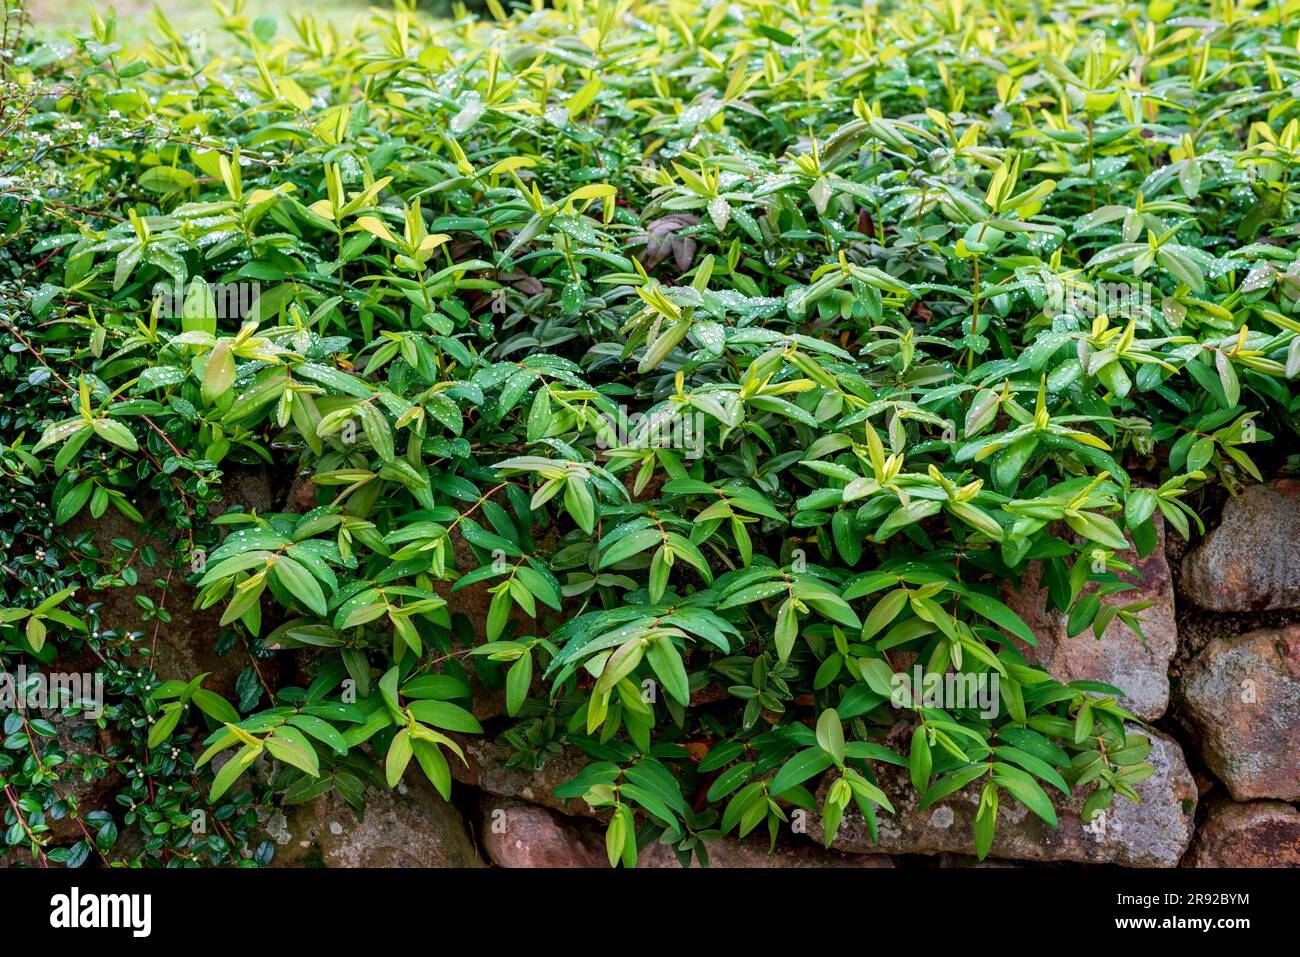 Hypericum perforatum, known as St. John's wort, is a flowering plant in the family Hypericaceae and the type species of the genus Hypericum. Stock Photo